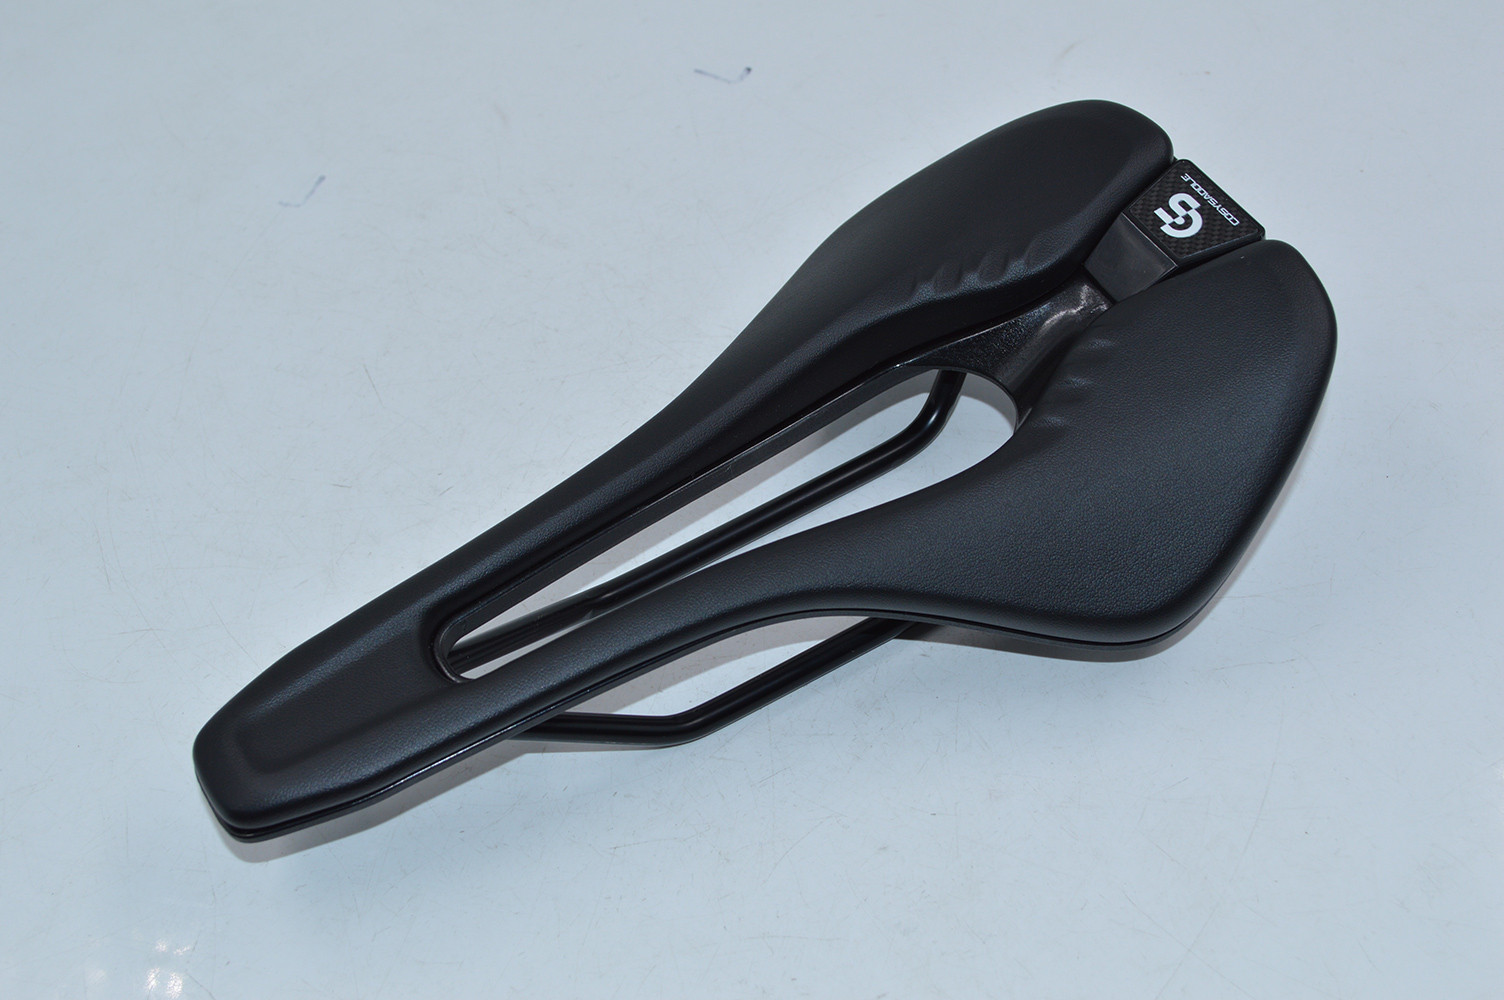 The COSY SADDLE bike saddle is upgraded in several ways for increased comfort and safety